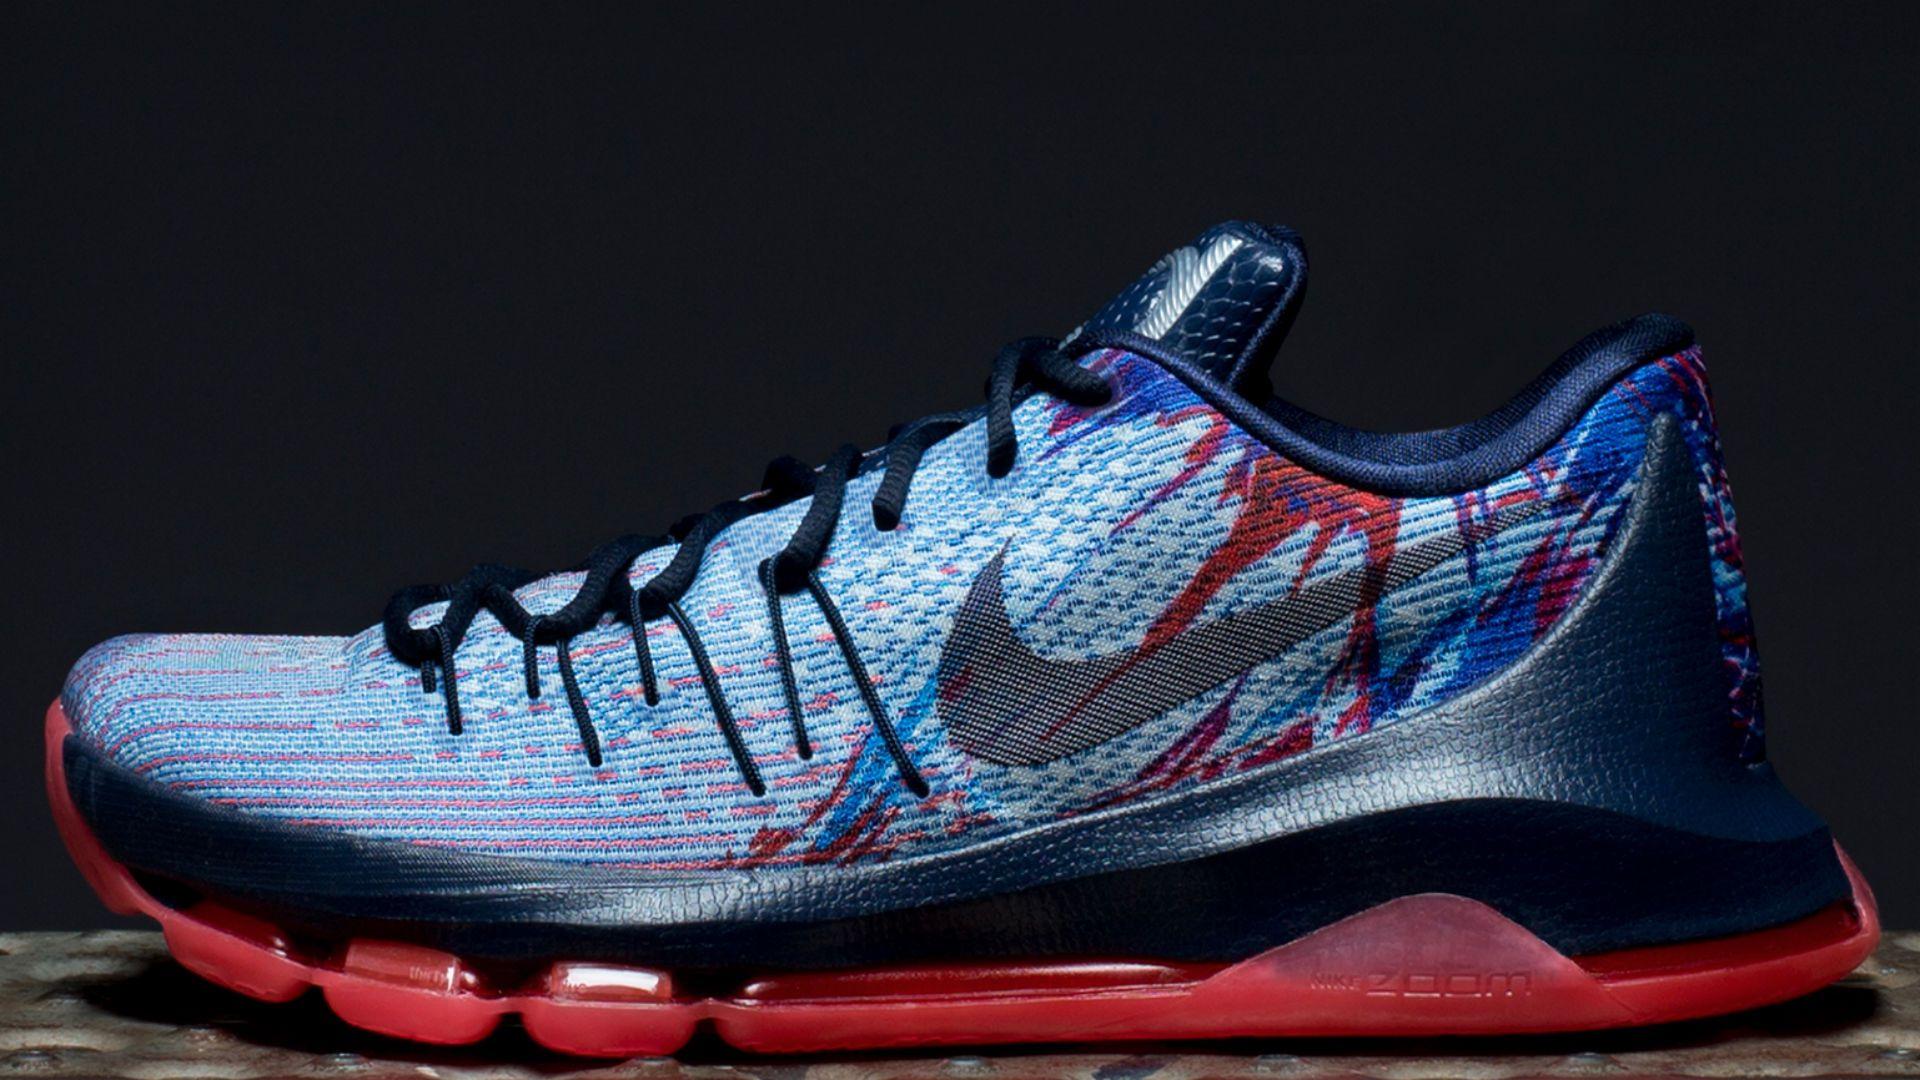 Nike unveils Kevin Durant's latest shoe, the KD8